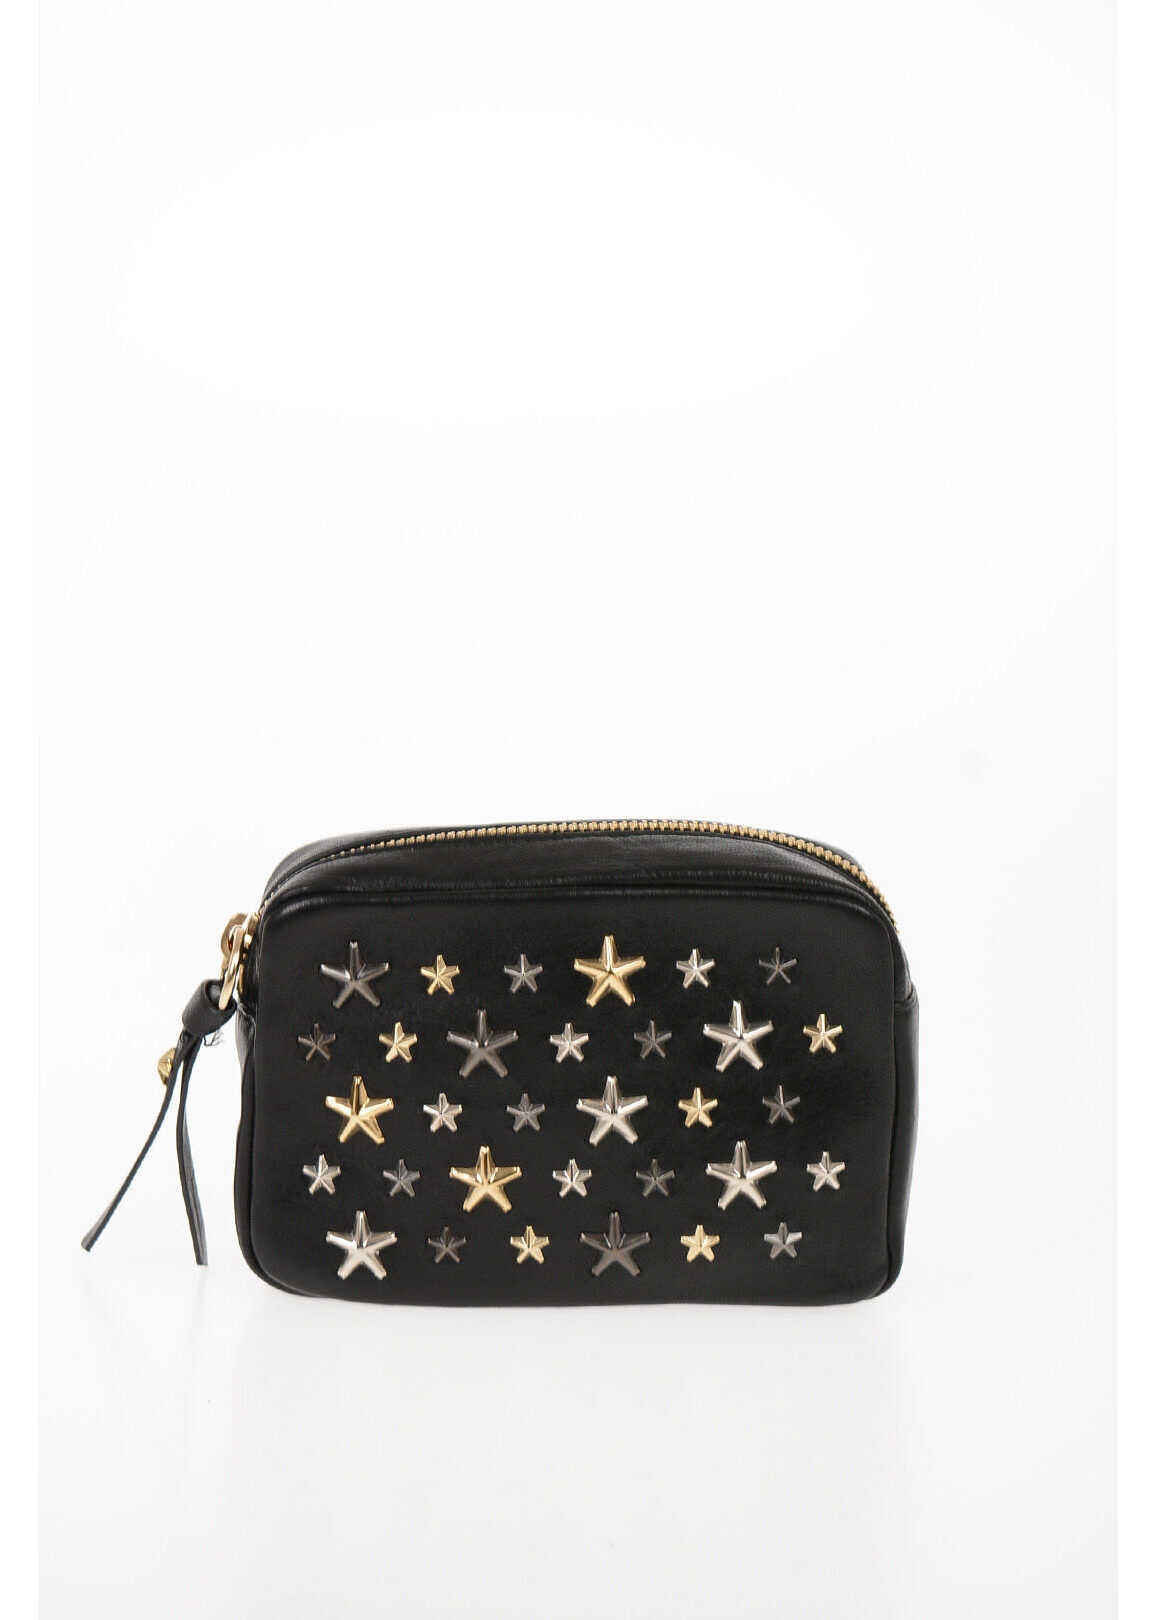 Jimmy Choo Leather Capella Necessaire With Metal Stars Black